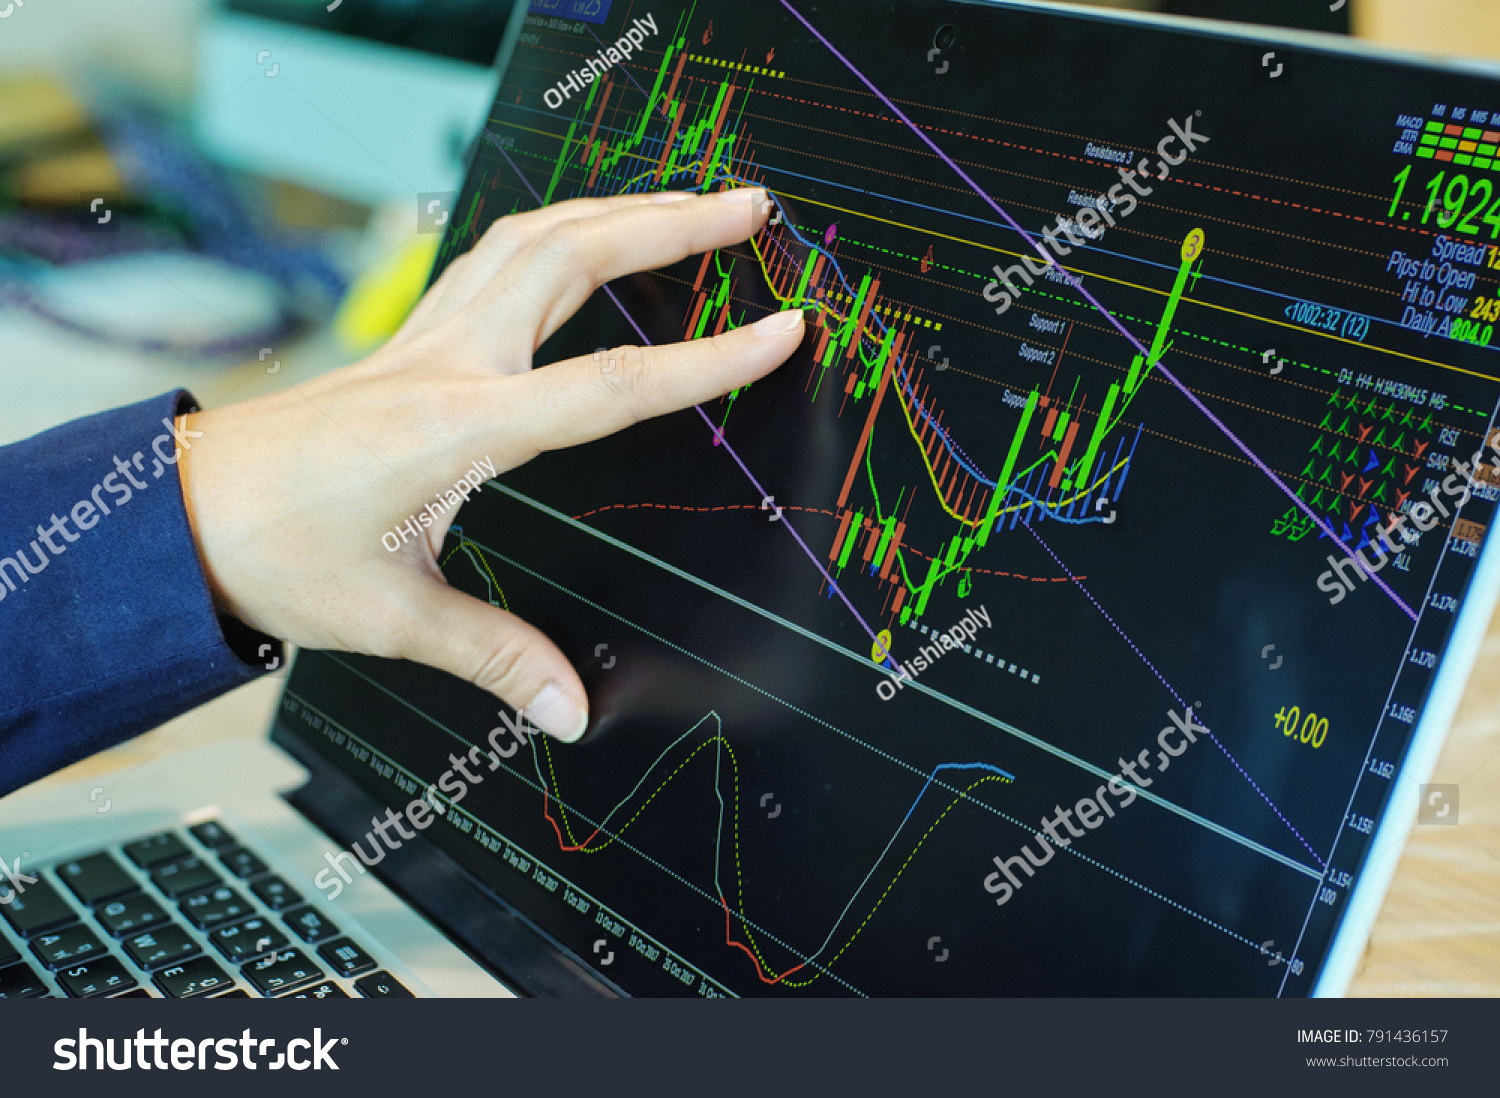 business people working with stock trading forex with technical indicator tool on laptop #791436157